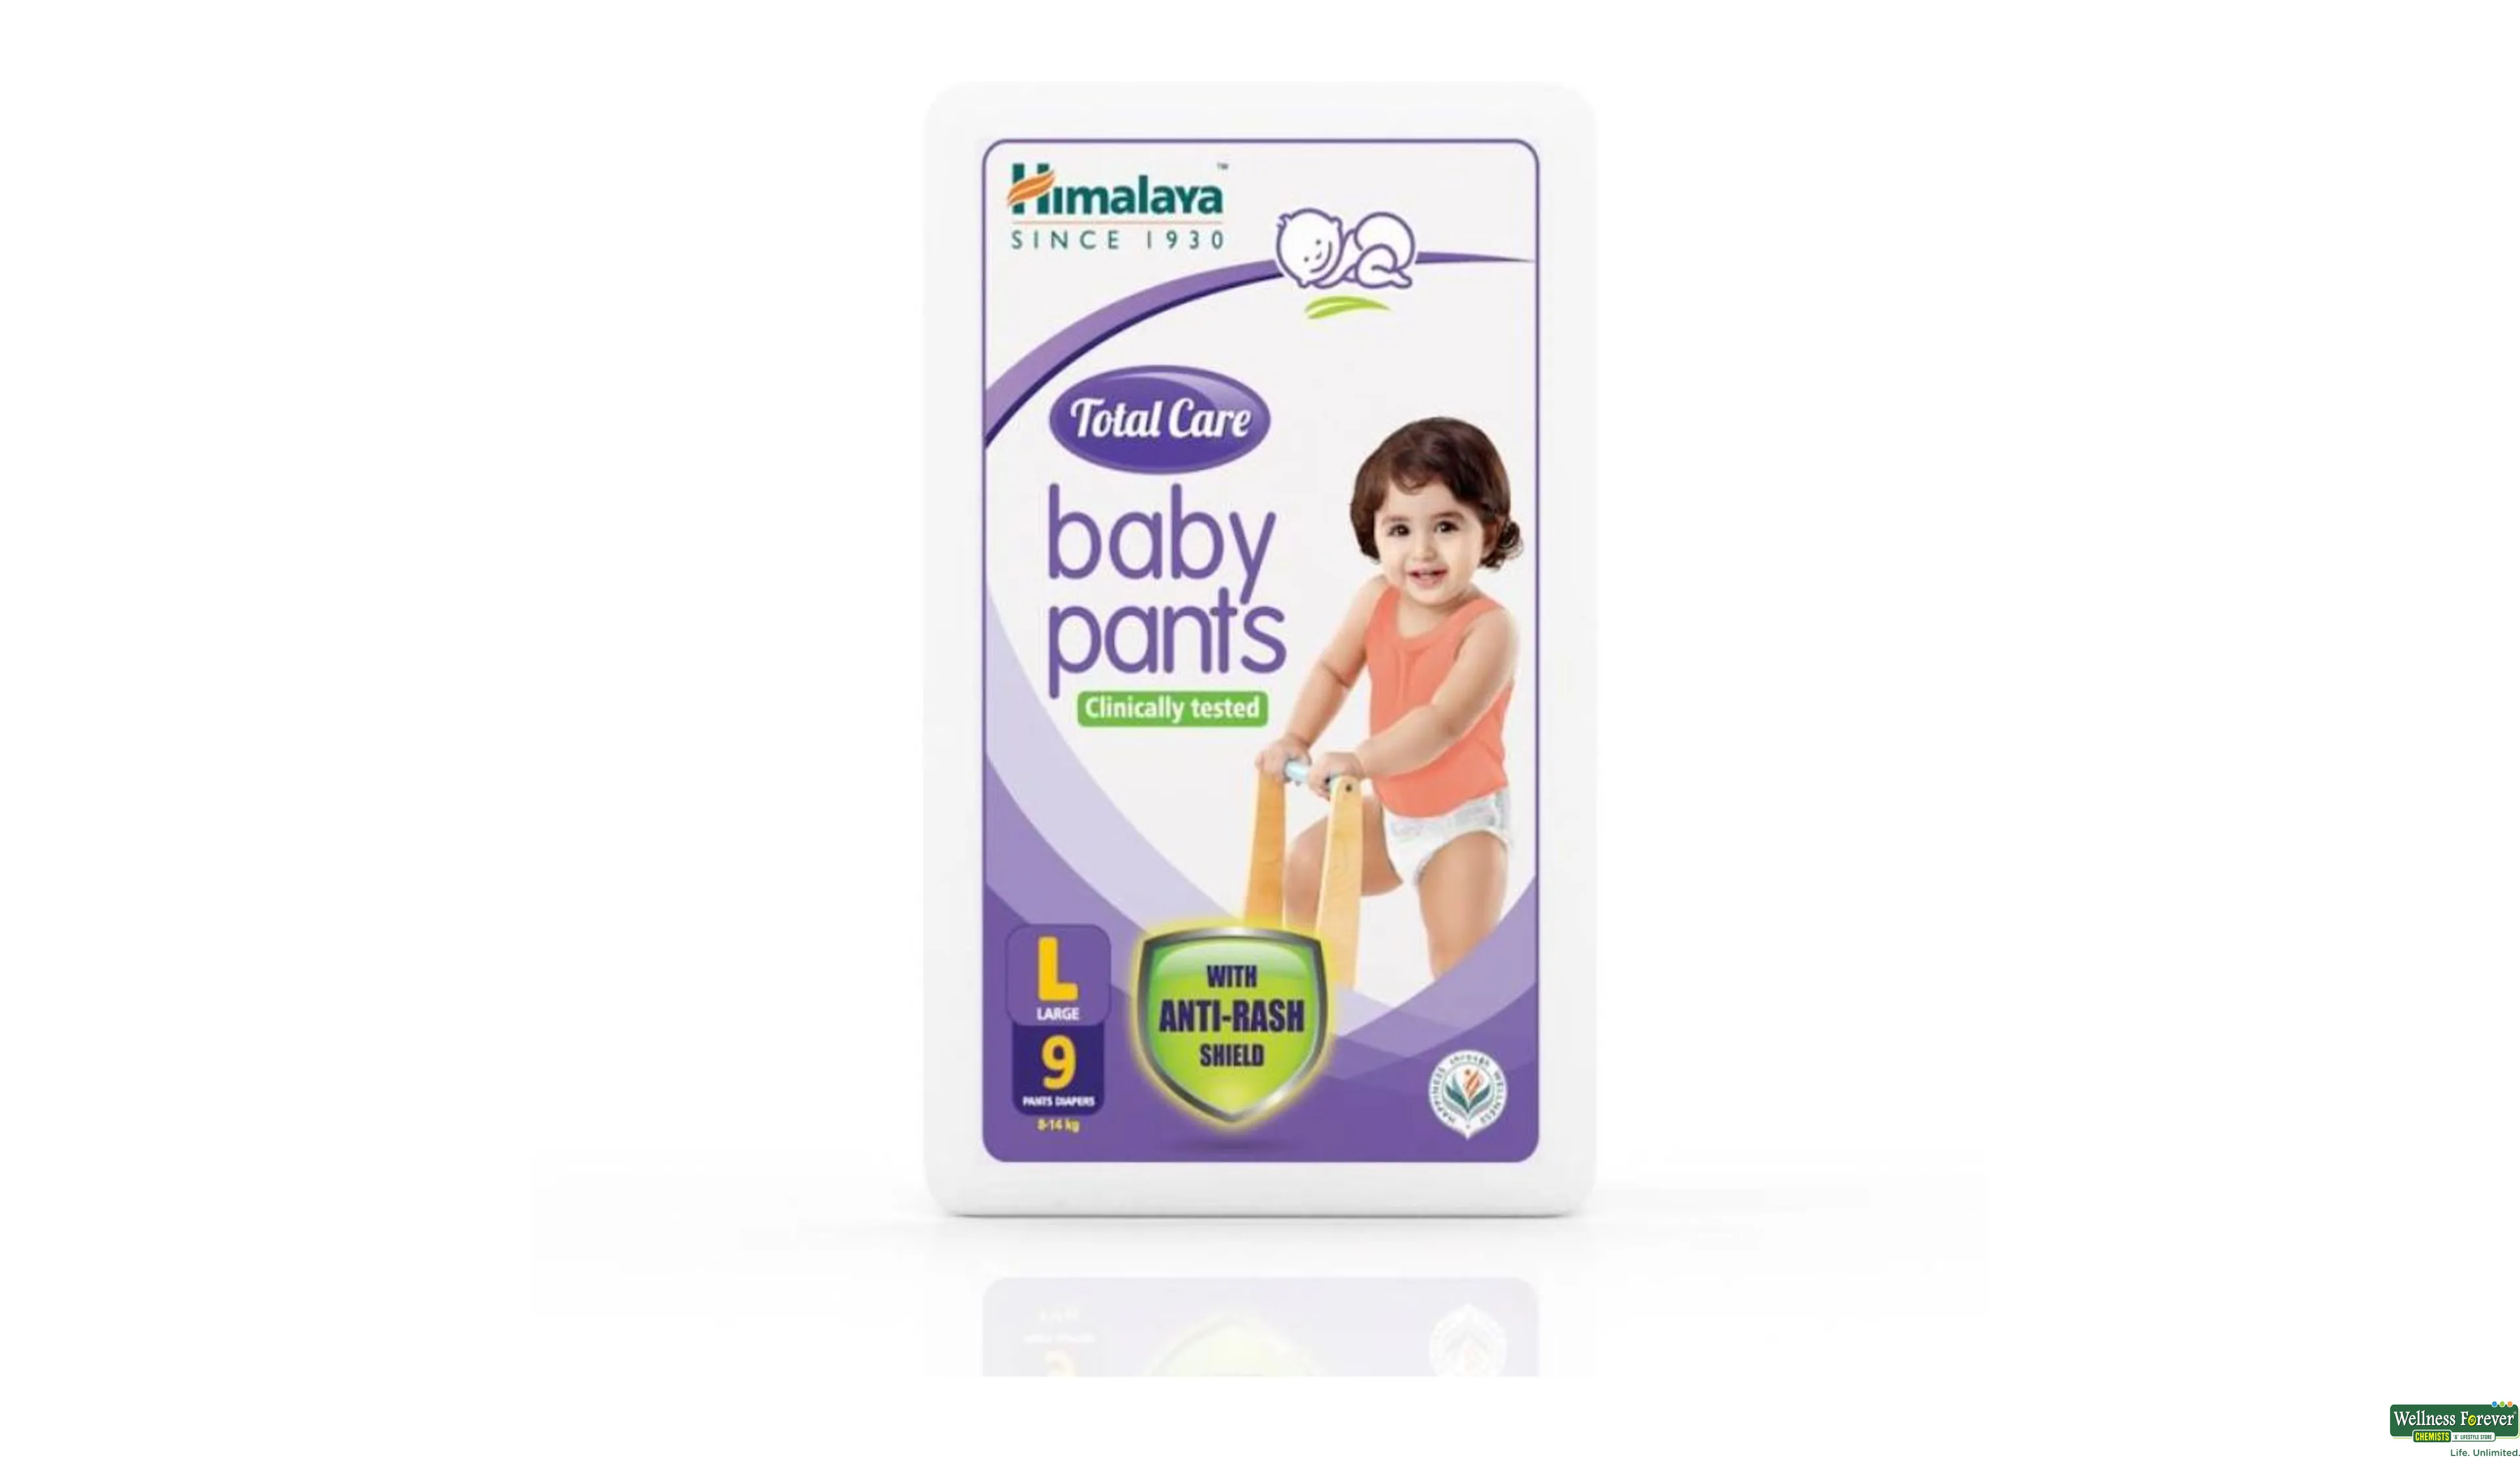 Himalaya Total Care Extra Large Size Baby Pants Diaper (54 Count)set of 2 -  XL (54 Pieces) in Bangalore at best price by MUM N MINI - Justdial